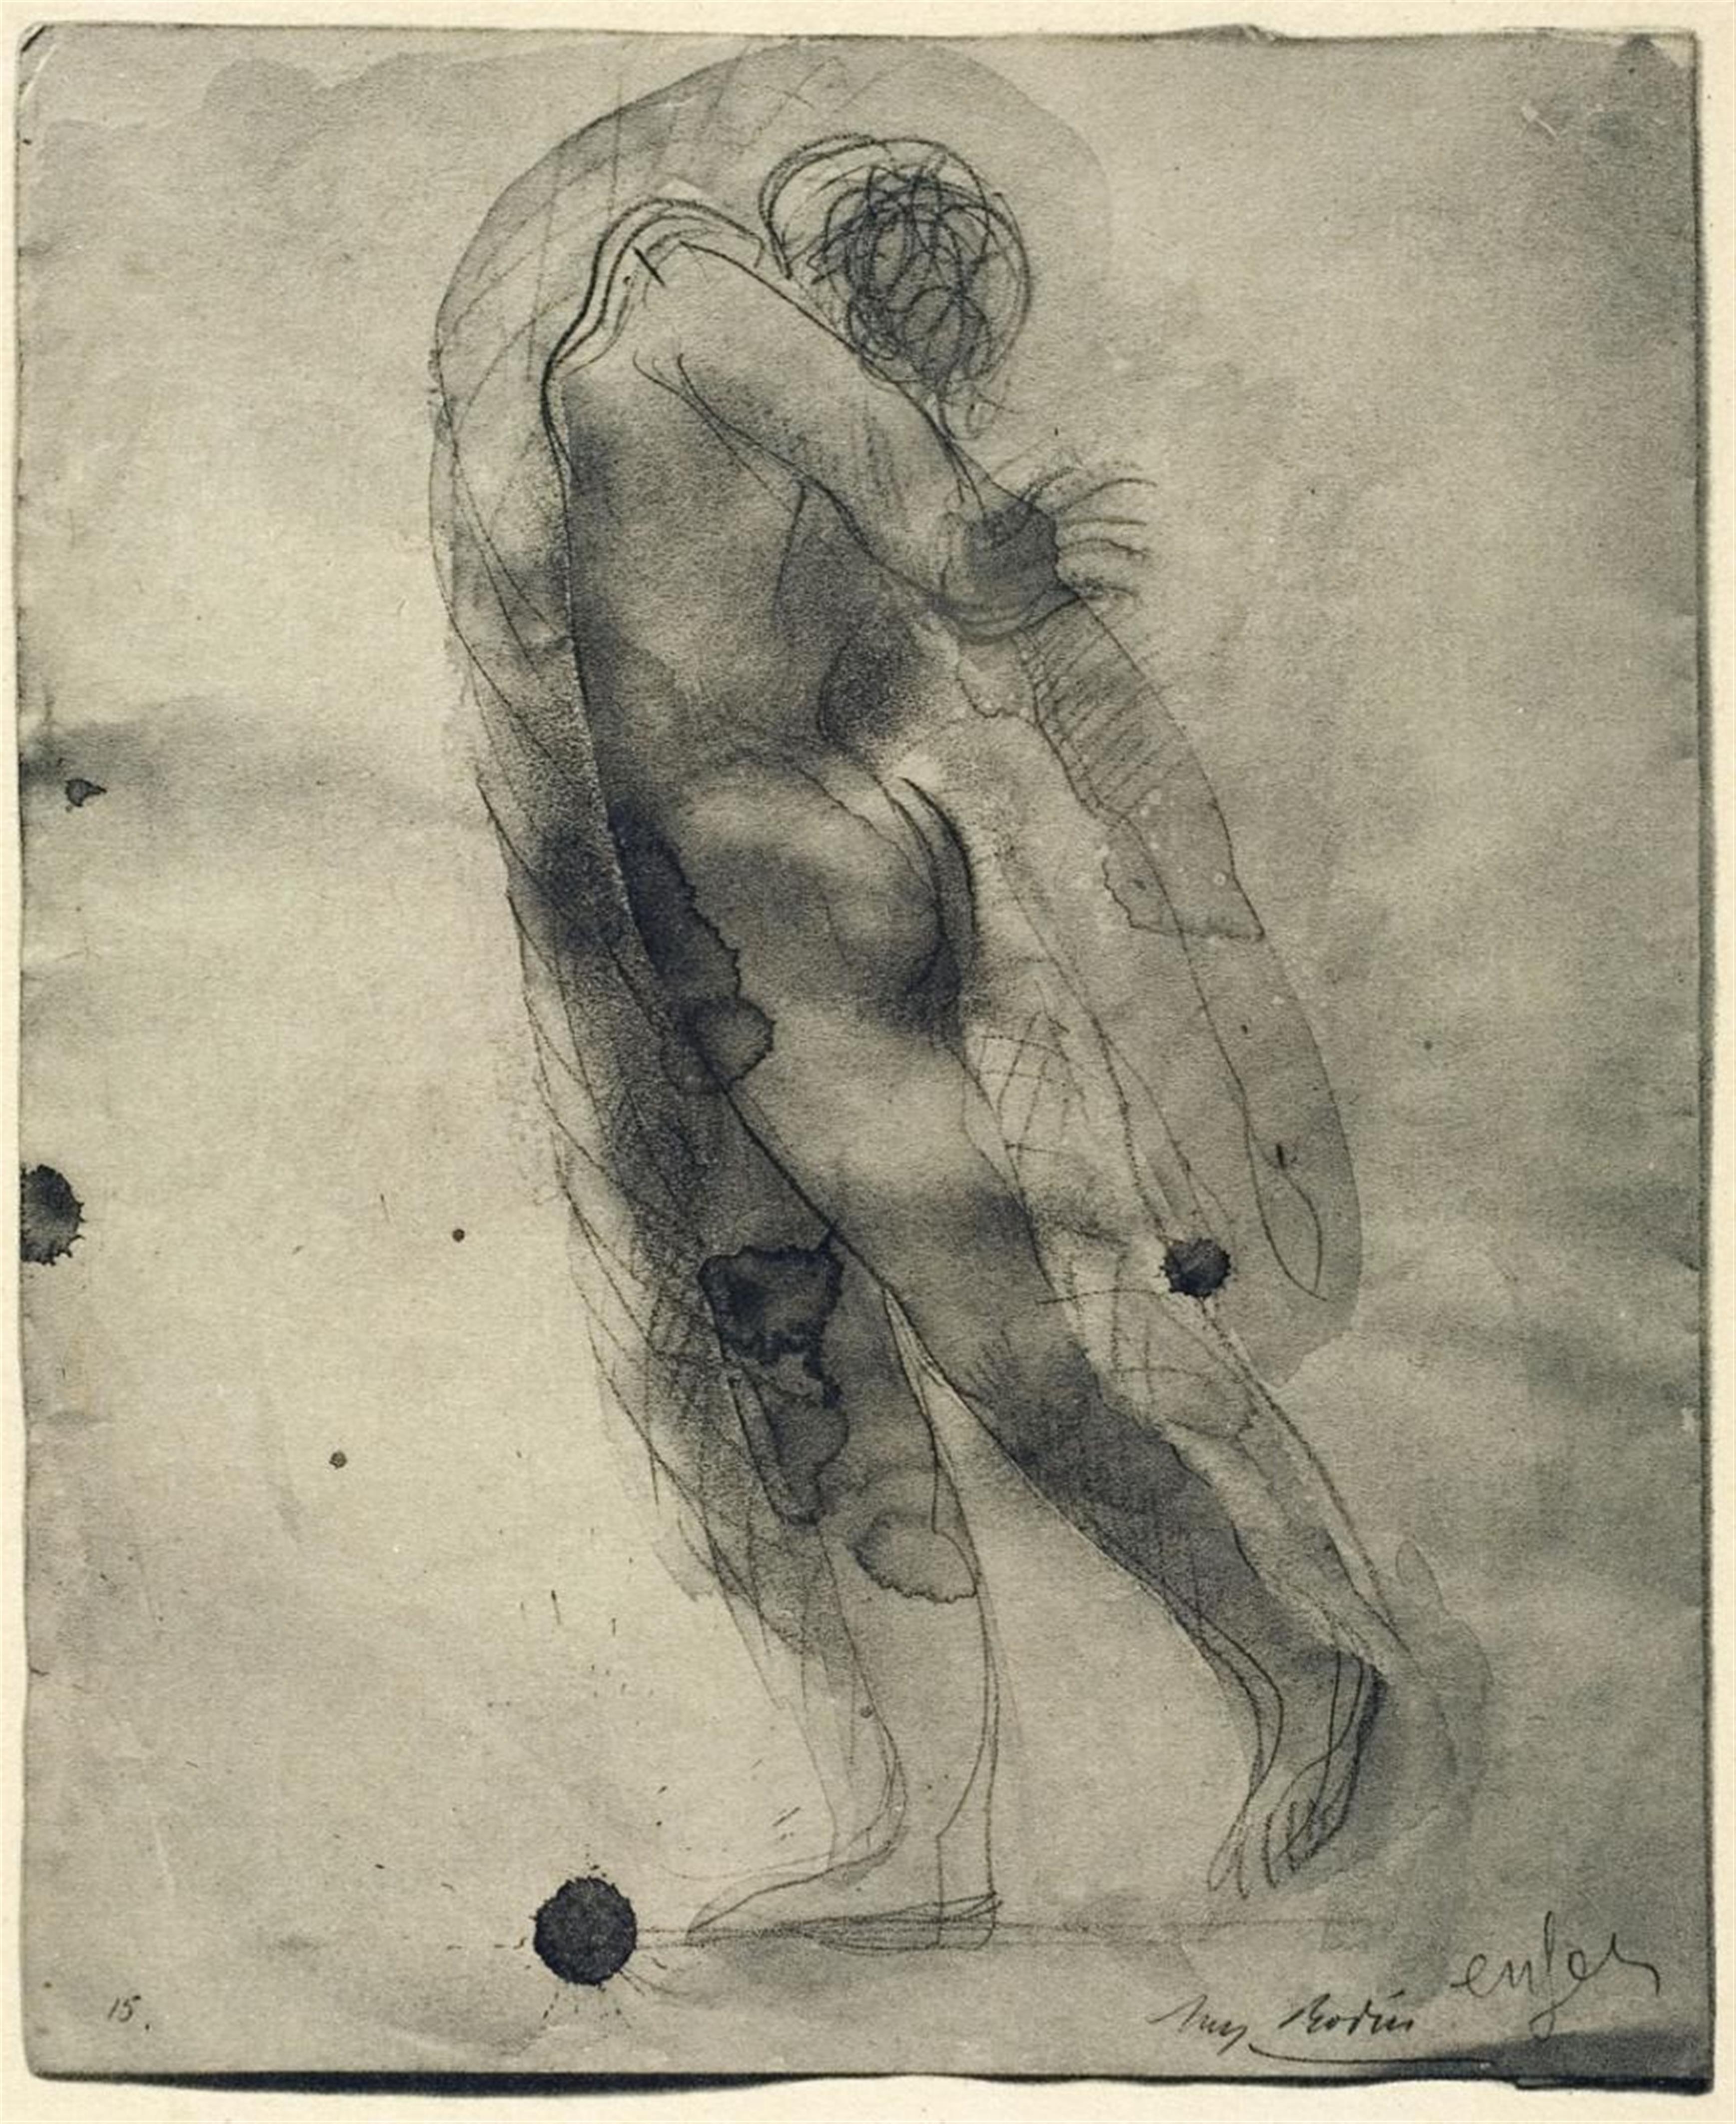 Auguste Rodin - PHOTOGRAVURE OF DRAWING. PHOTOGRAVURE OF DRAWING. CAMBODIAN DANCER. DRAWING (SUN SERIES). DRAWING (SUN SERIES). DRAWING. - image-3